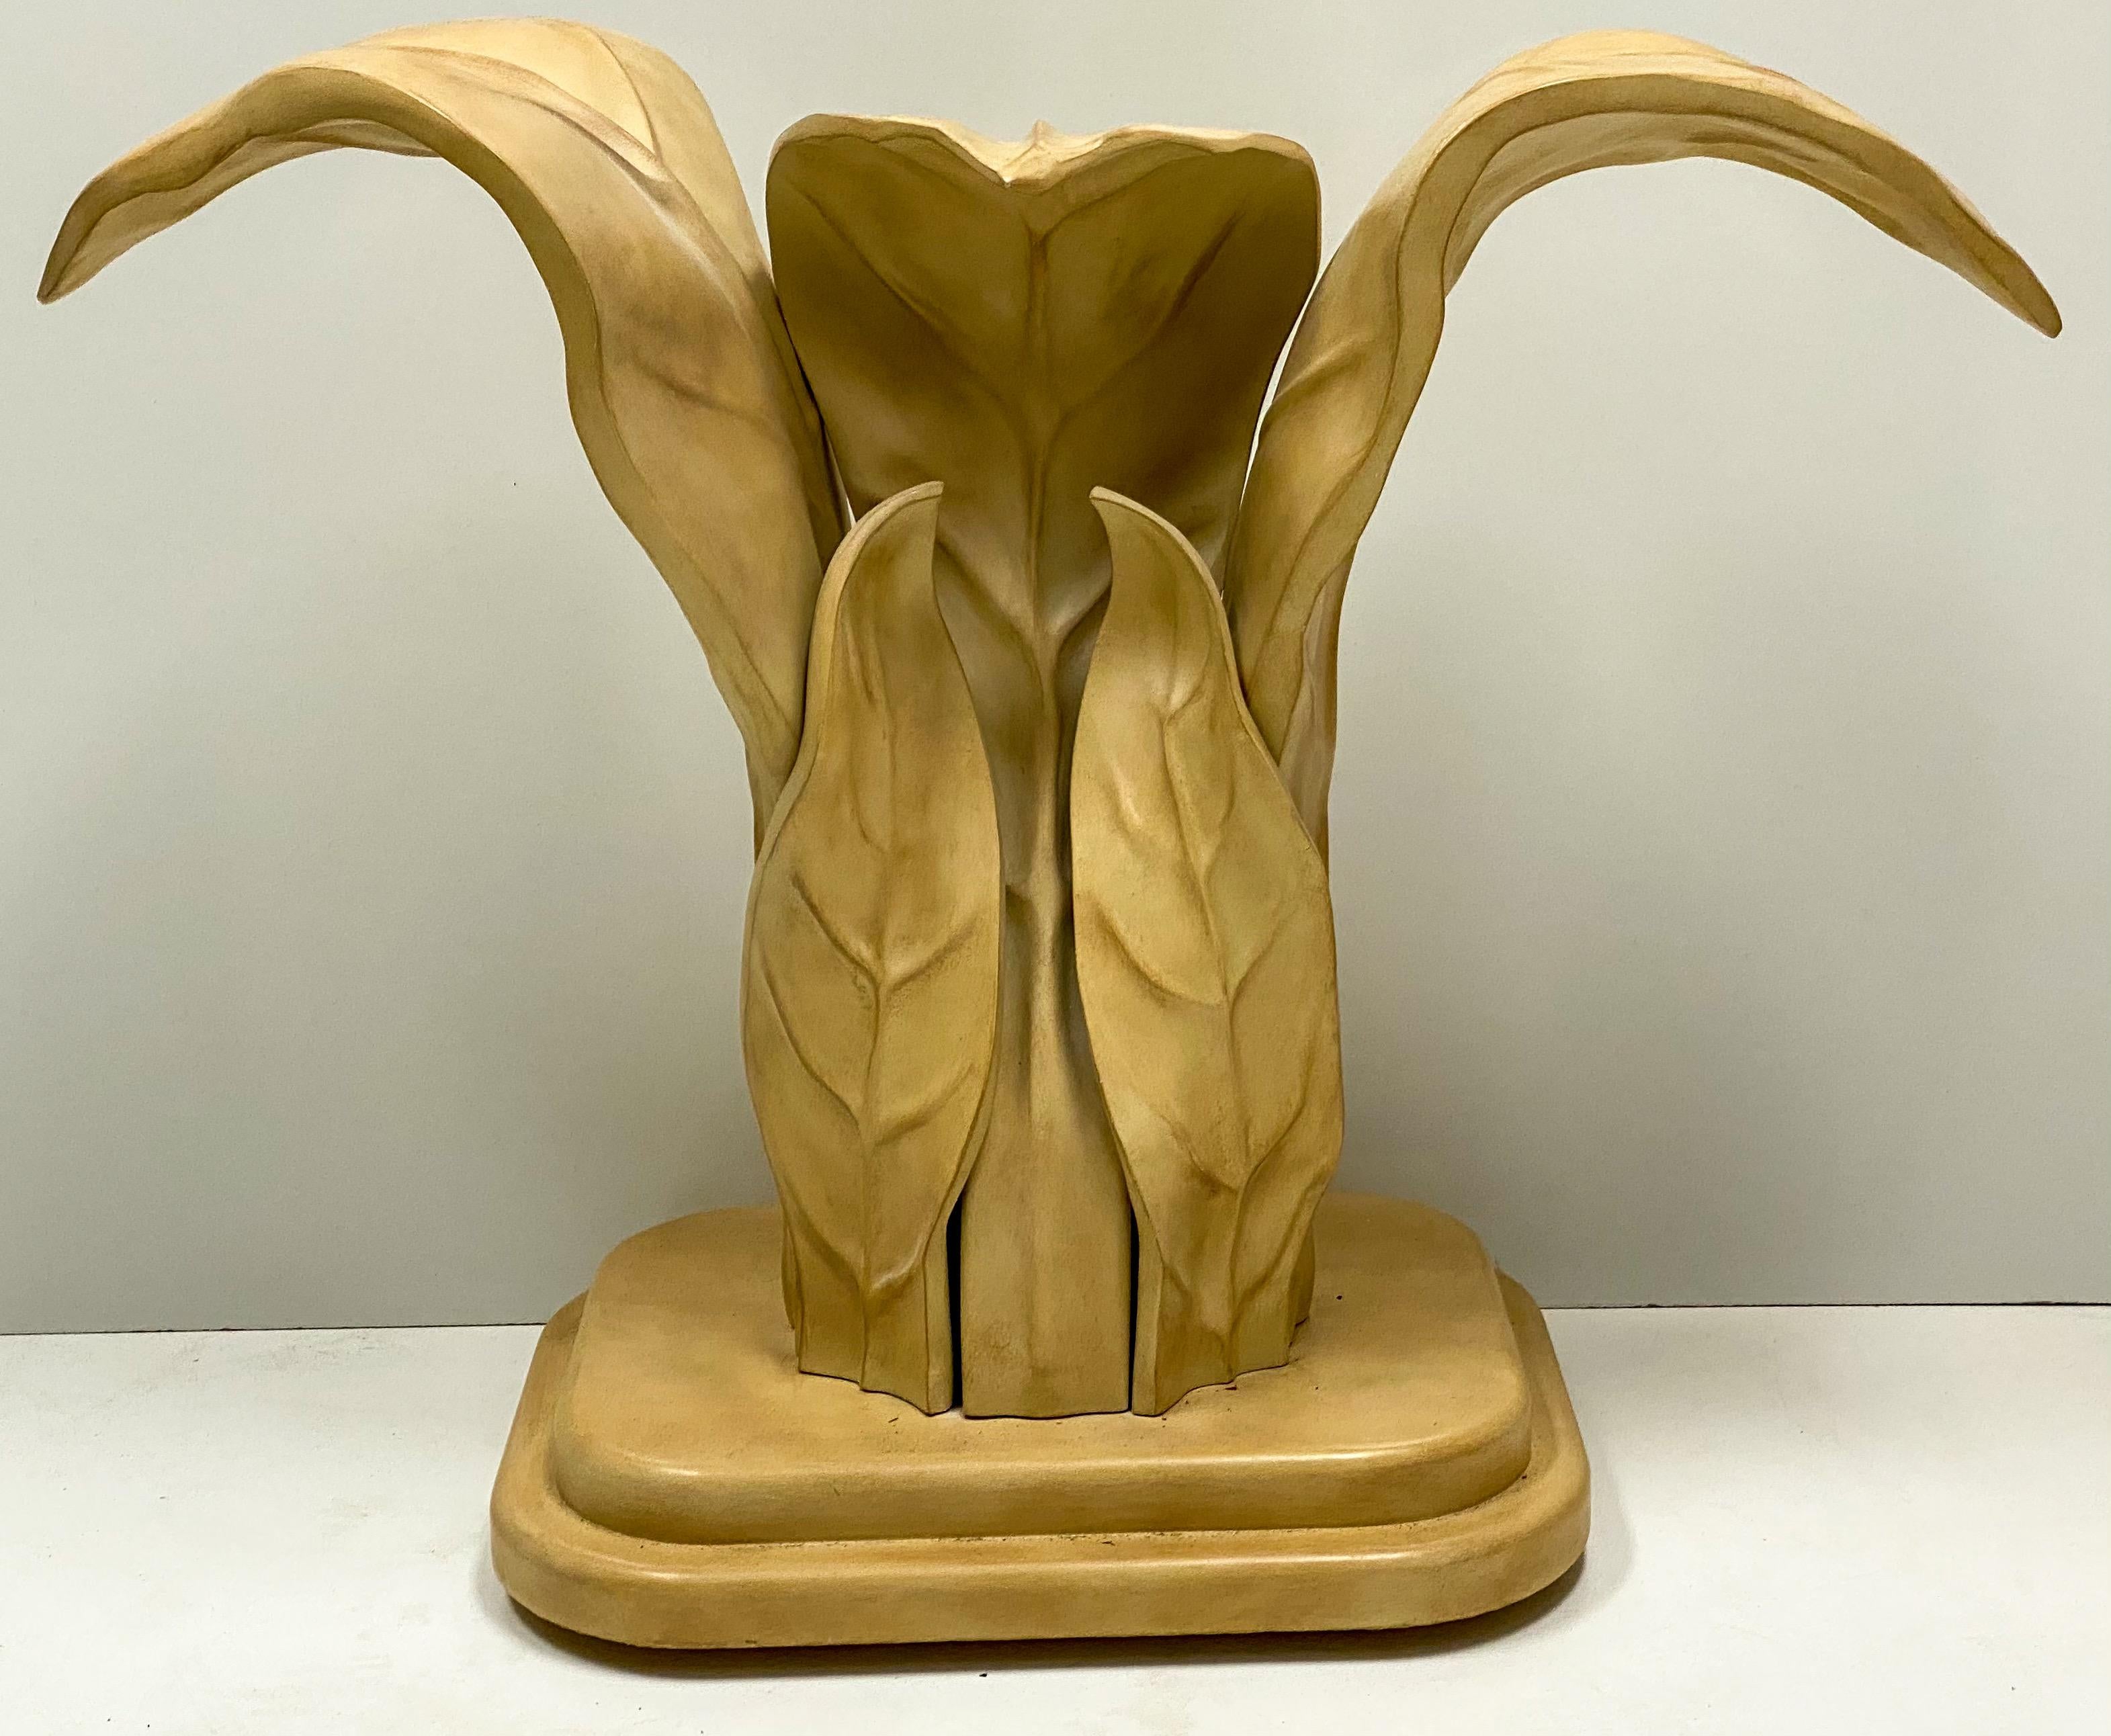 This is a 1970s modern organic leaf form console table by the Italian manufacturer Casa Bique.  It appears to be cast composition, and the leaves are banana leaves. It has a removable glass top and is in very good condition. Glass is 60” in length,